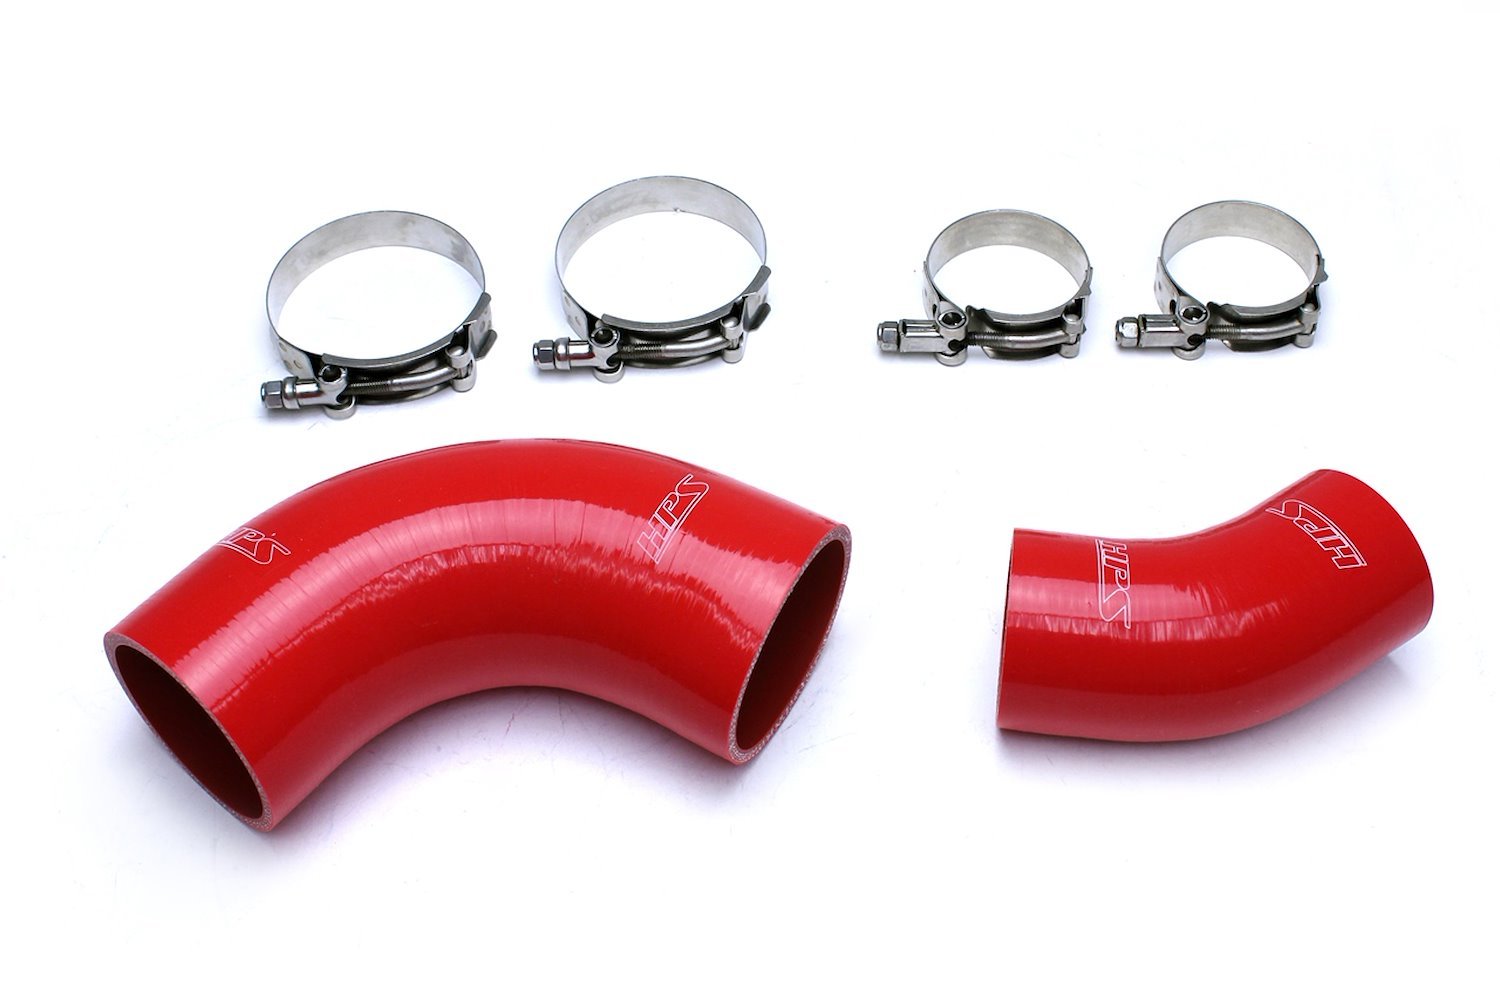 57-1486-RED Intercooler Hose Kit, High-Temp 4-Ply Reinforced Silicone, Replace OEM Rubber Intercooler Turbo Boots